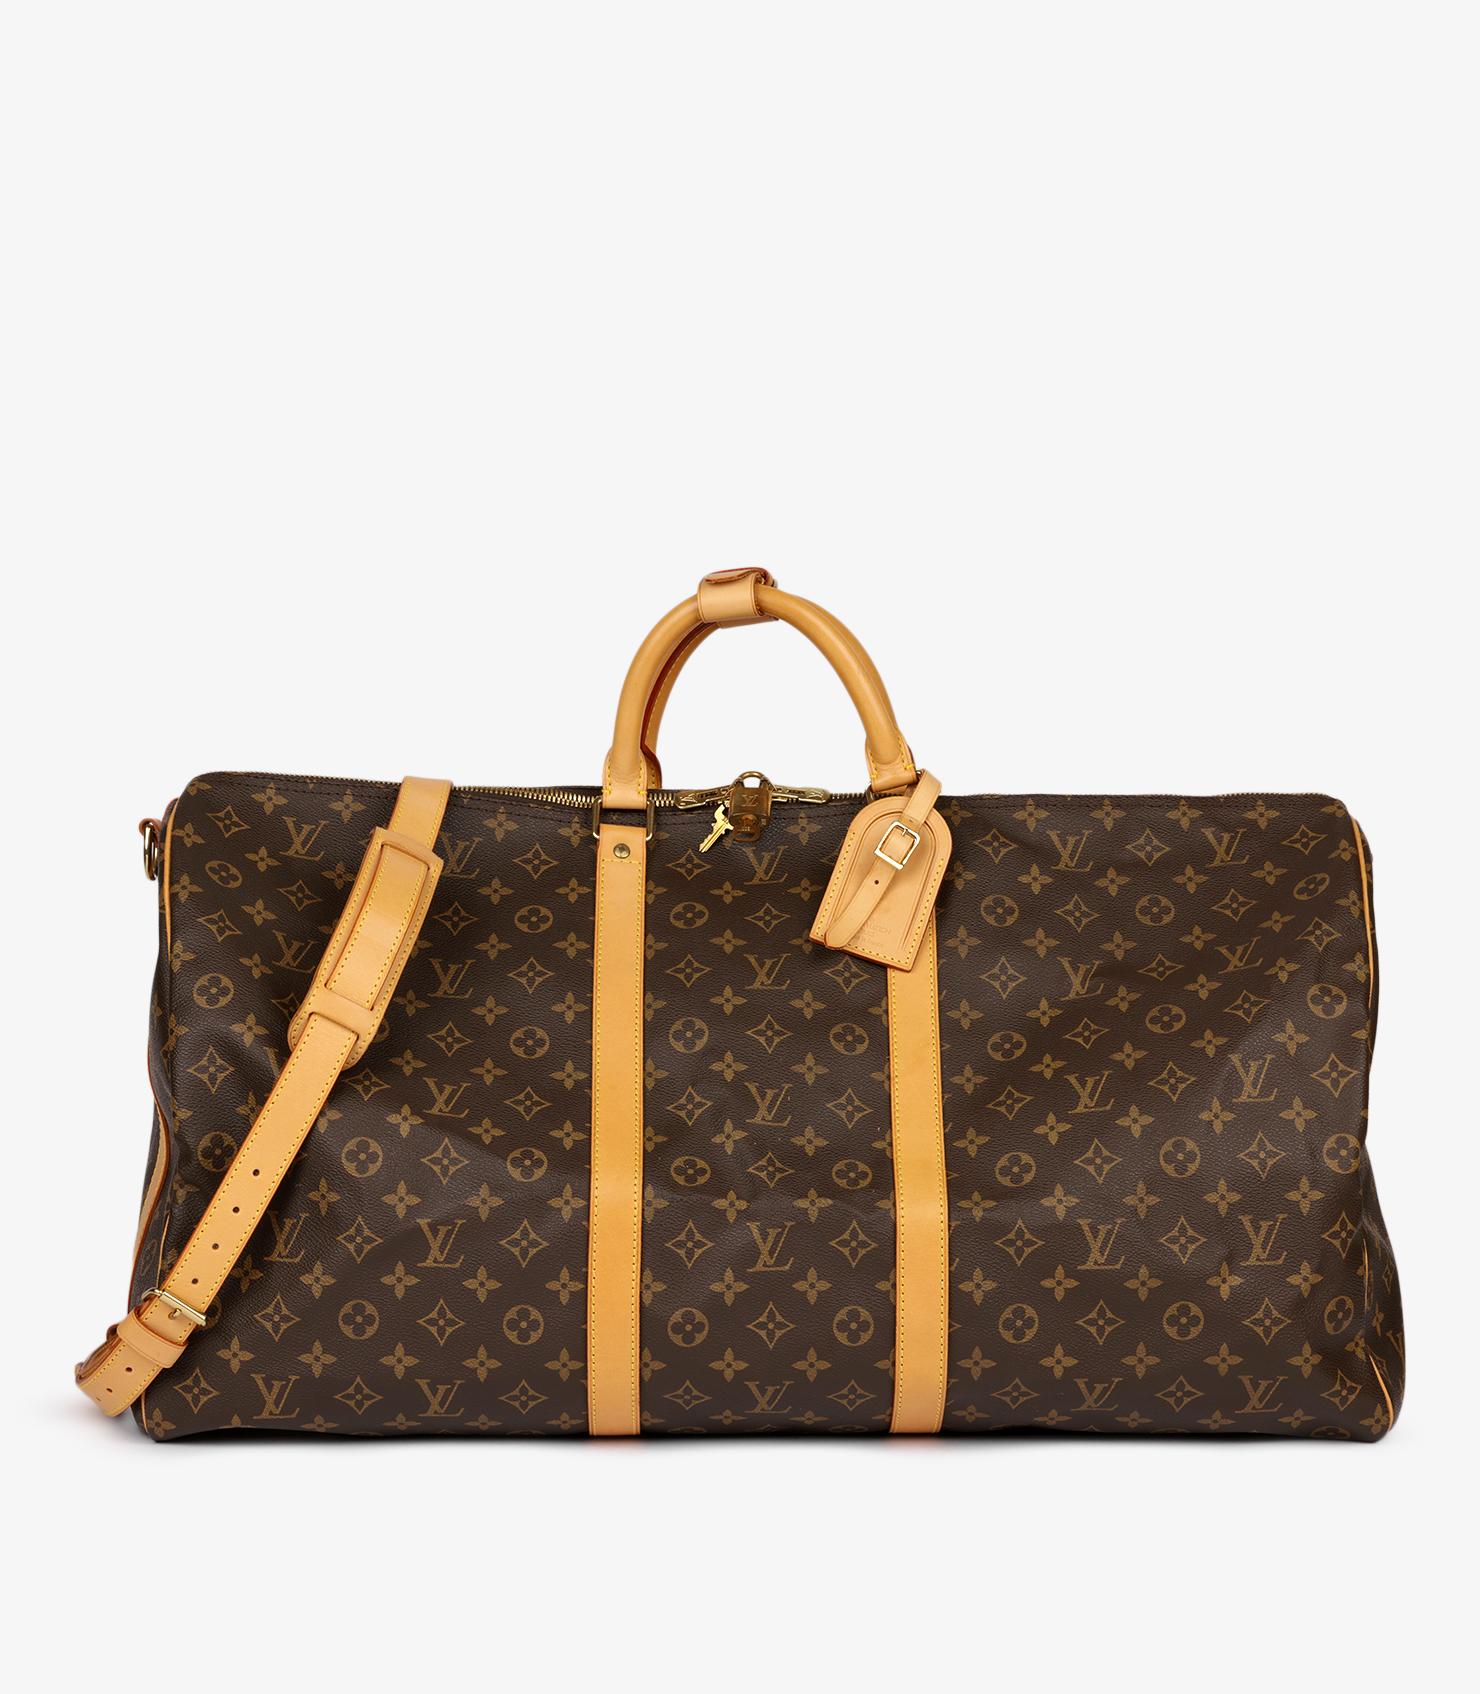 Louis Vuitton Brown Monogram Coated Canvas & Vachetta Leather Vintage Keepall 60 Bandouliere

Brand- Louis Vuitton
Model- Keepall 60 Bandoulière
Product Type- Travel
Serial Number- TH****
Age- Circa 1996
Accompanied By- Louis Vuitton Dust Bag,